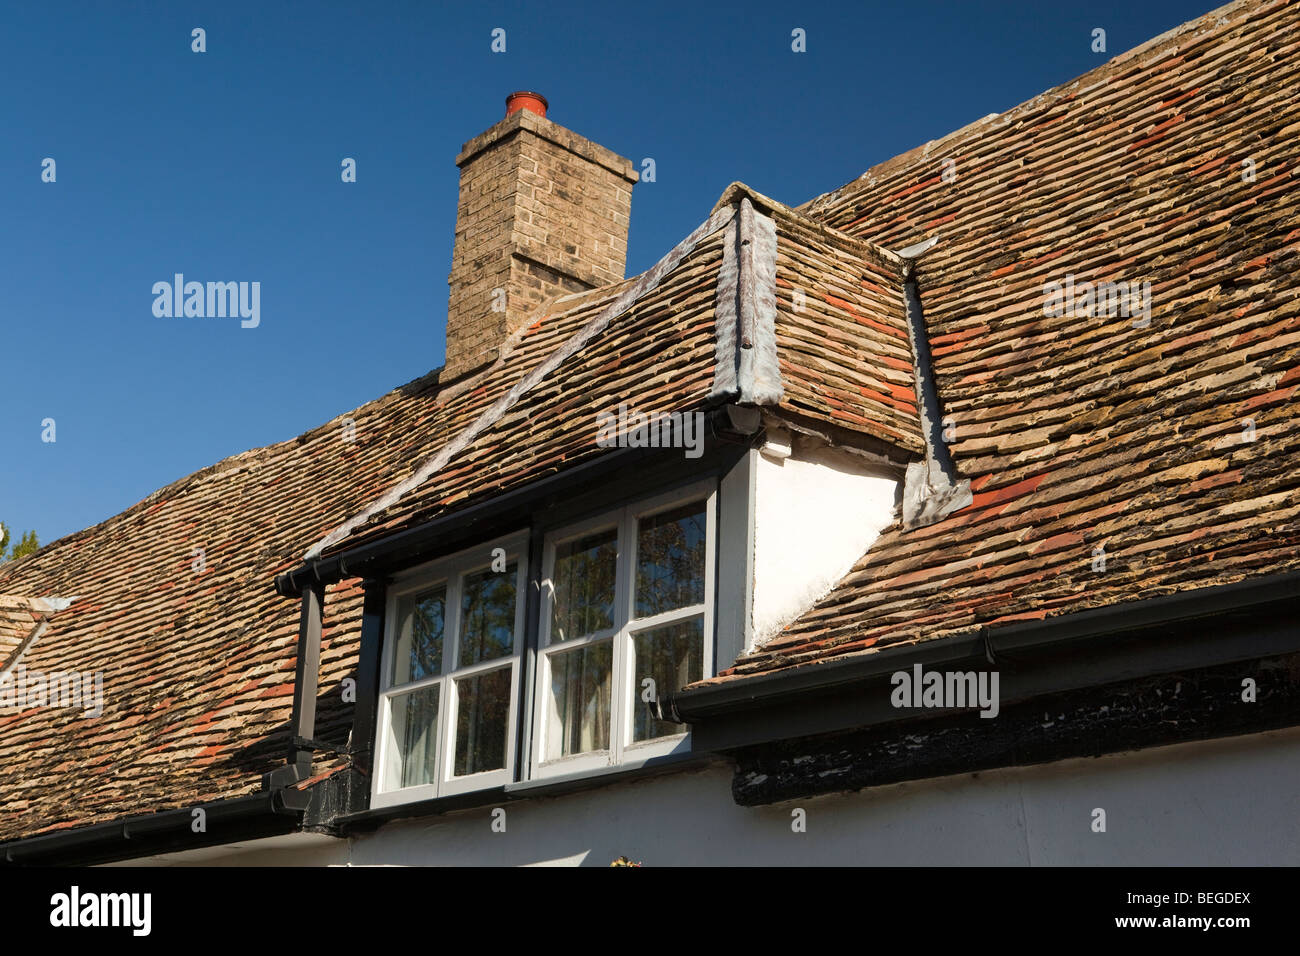 England, Cambridgeshire, Fenstanton, dormer window in cottage roof made from locally manufactured tiles Stock Photo